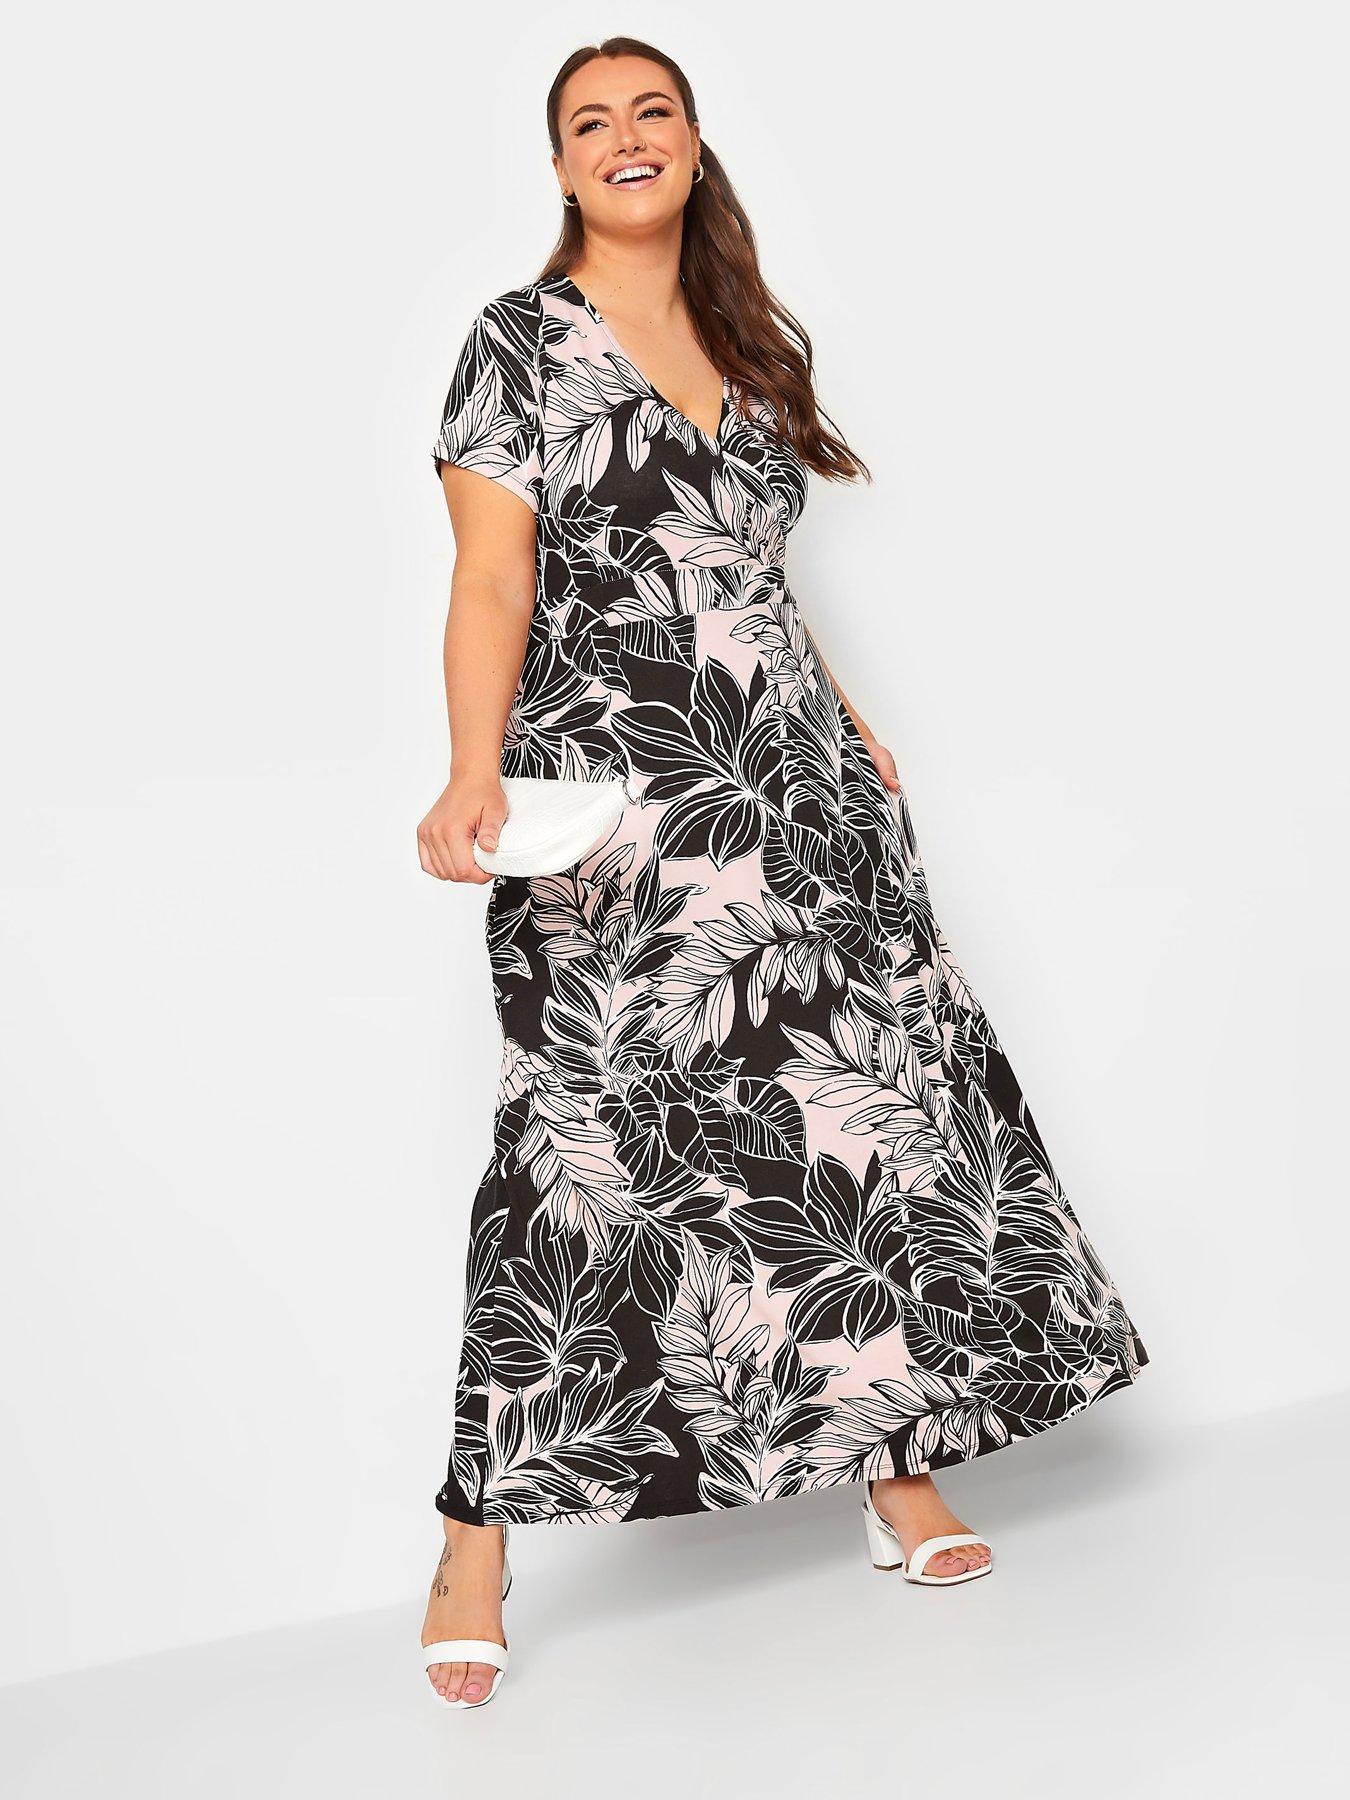 Yours Clothing size 14 review: Plus Size summer dresses in sizes 14-40